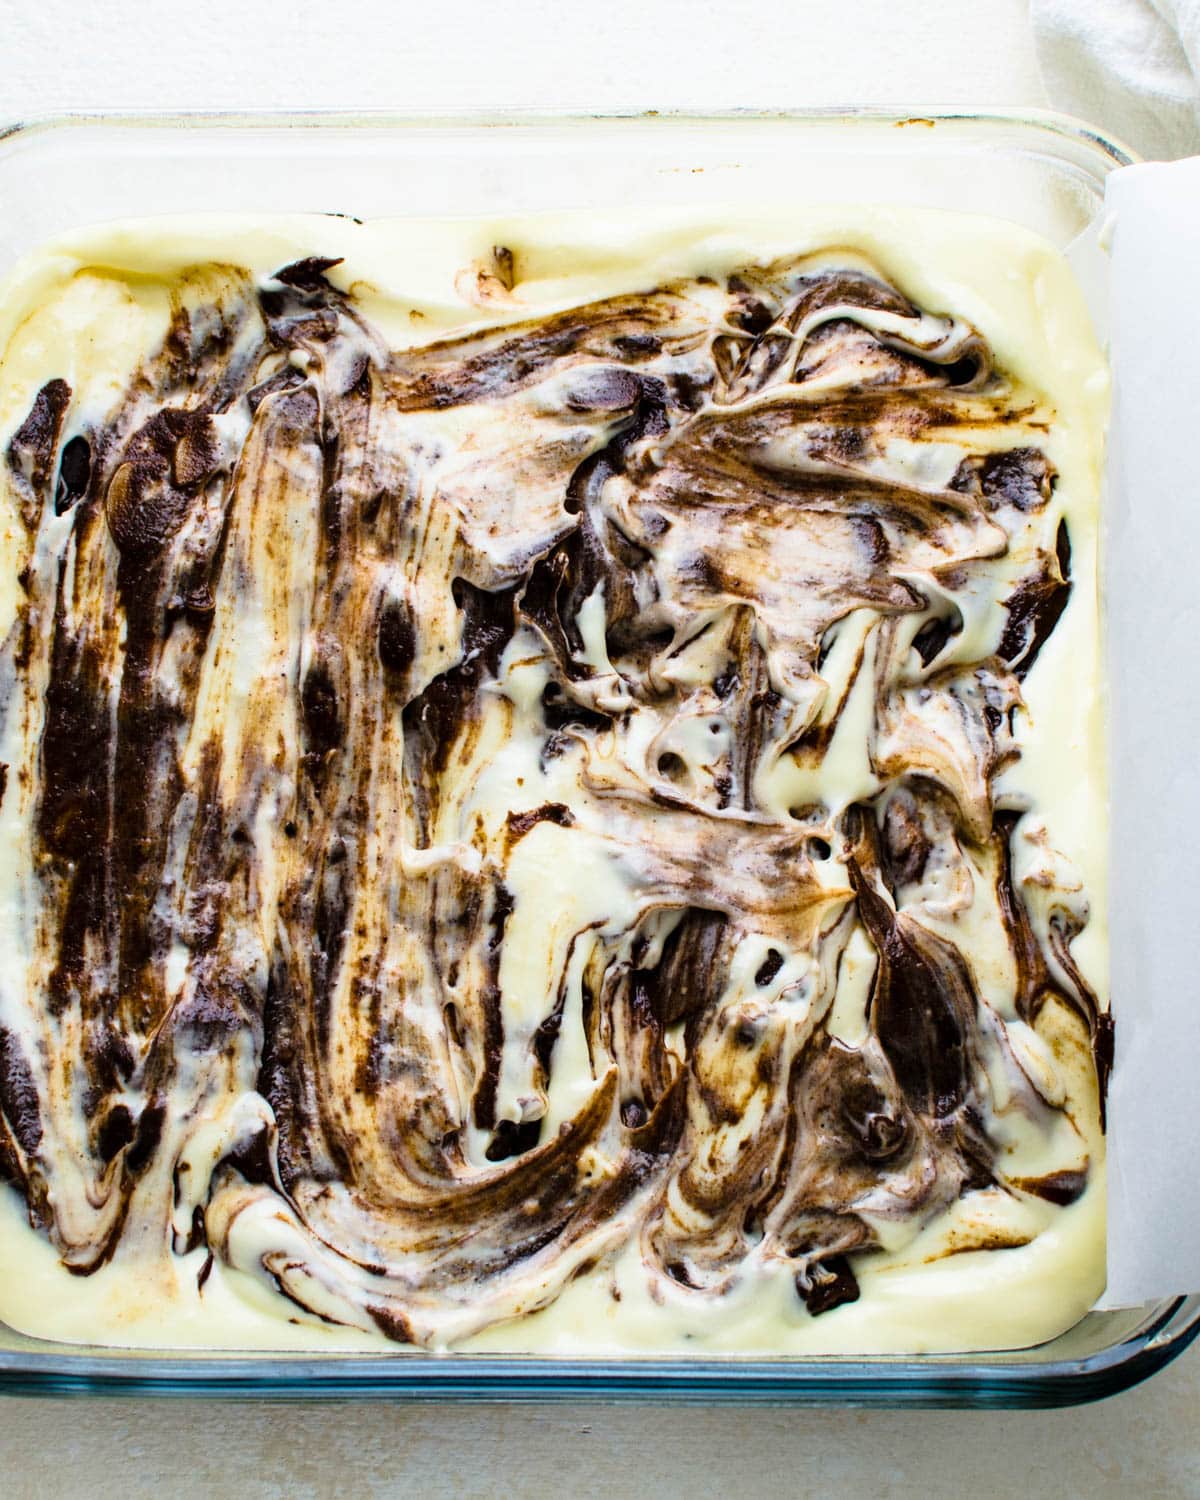 Swirling the remaining brownie batter into the cheesecake layer.